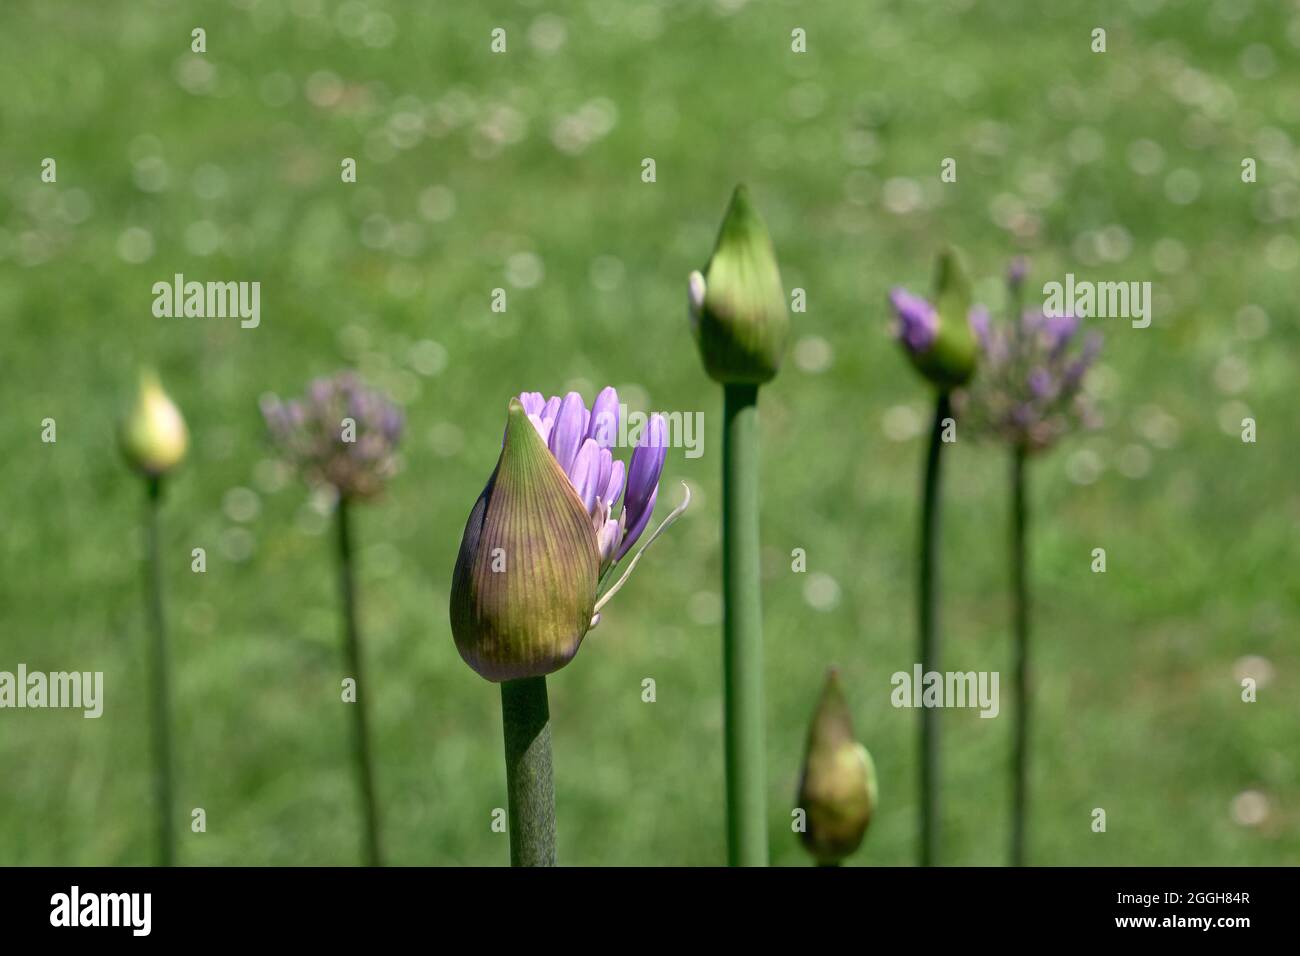 Agapanthus praecox blue lily flower bud blooming Stock Photo